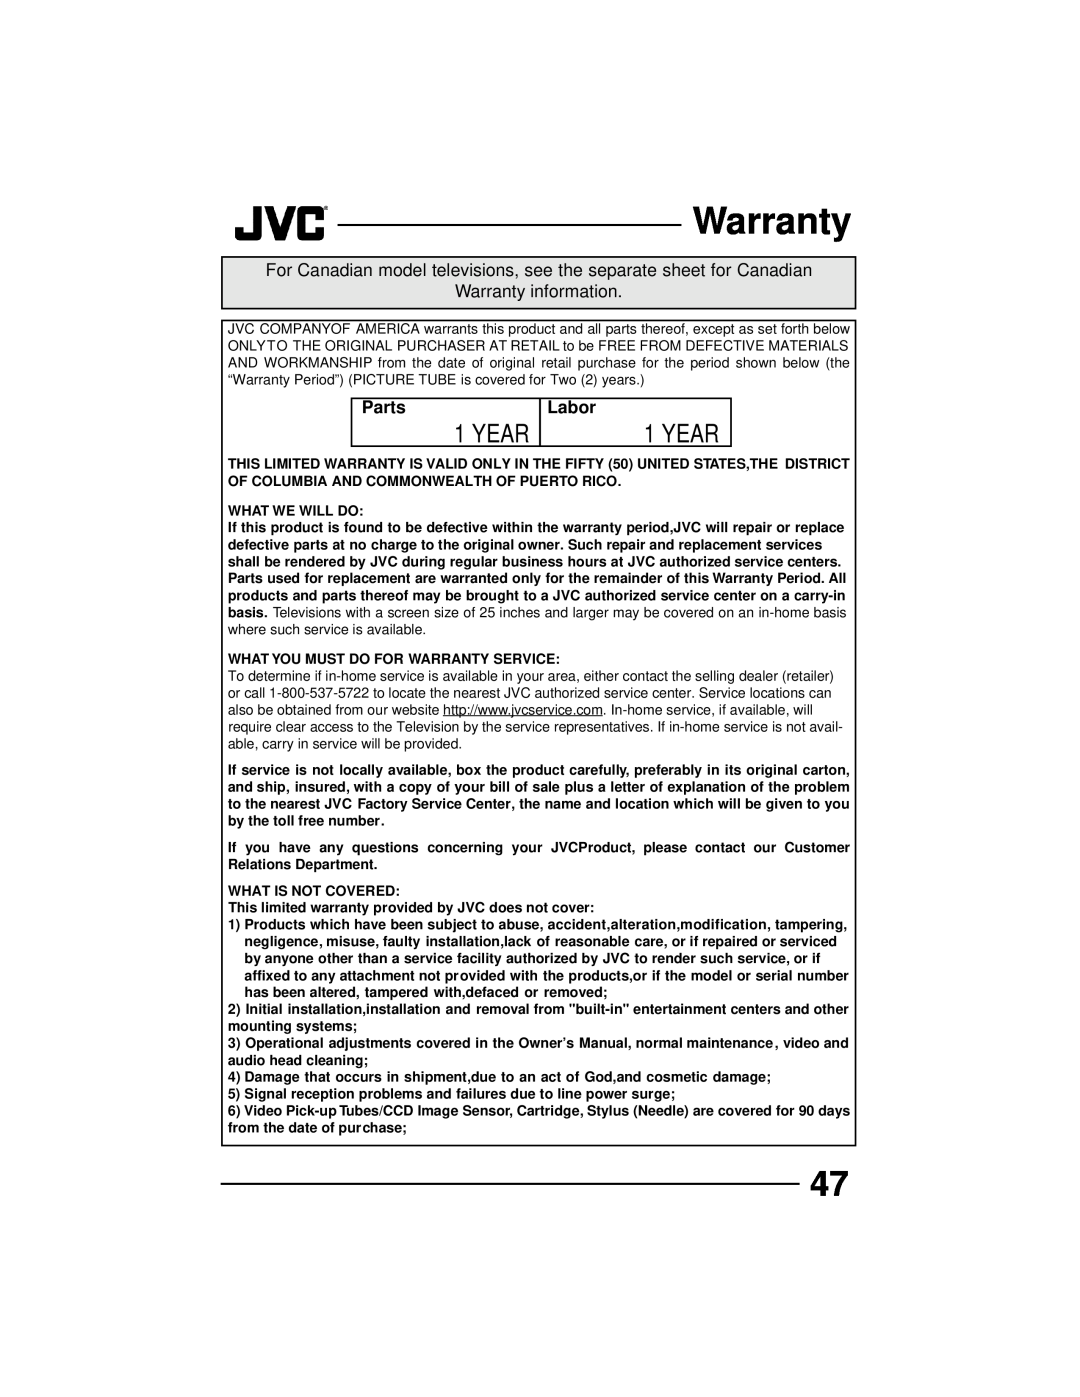 JVC AV 27D502 Year, For Canadian model televisions, see the separate sheet for Canadian, Warranty information, Parts 